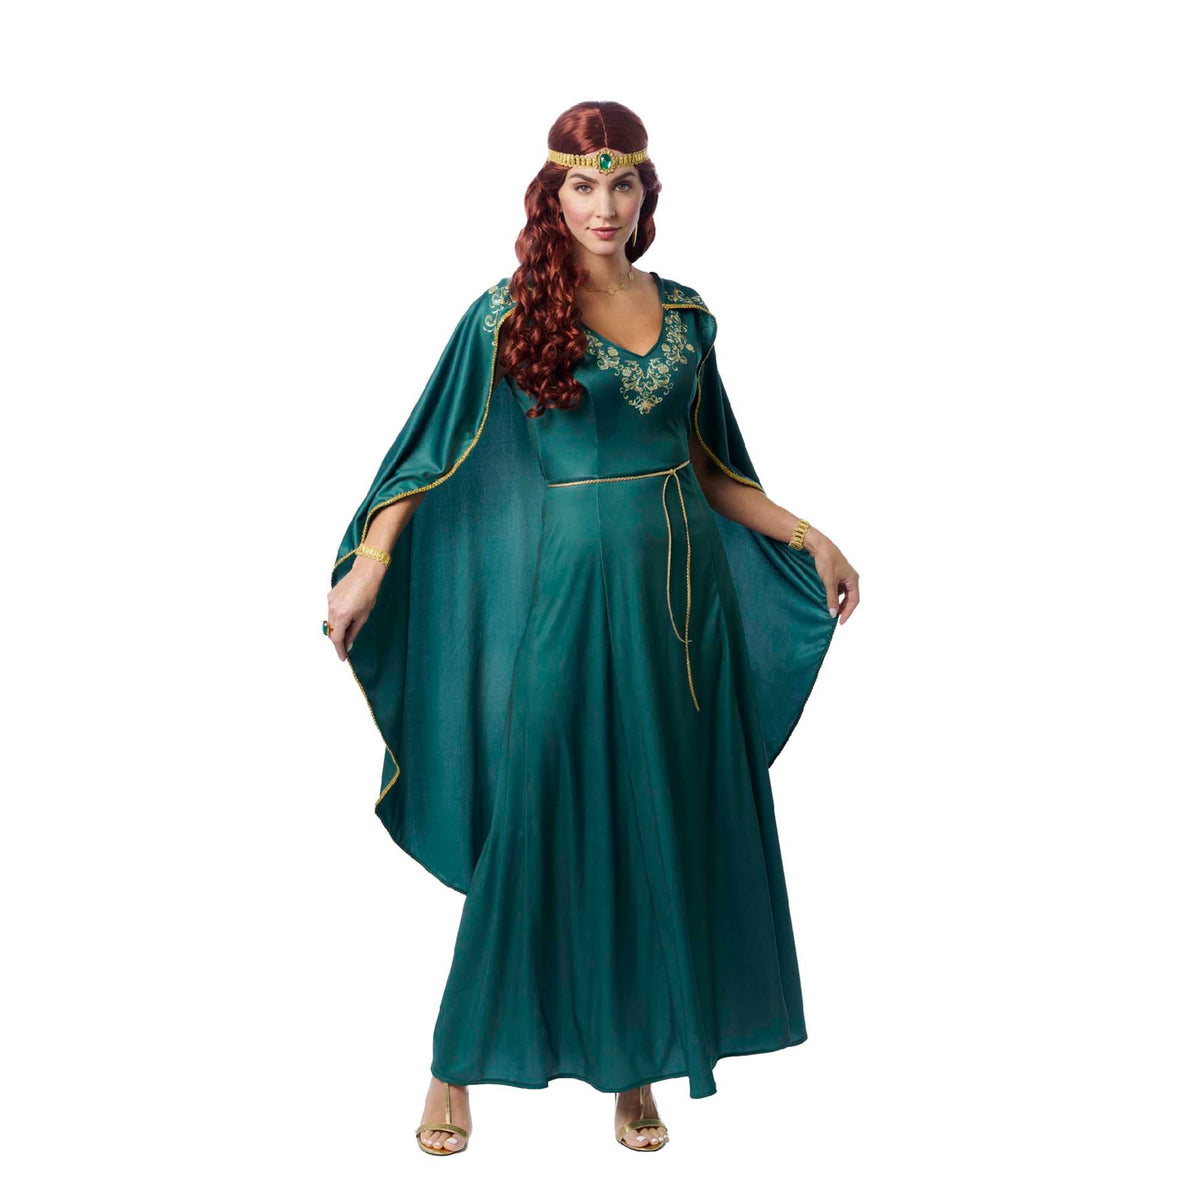 COSTUME CULTURE BY FRANCO Costumes Emerald Queen Costume for Adults, Green Dress